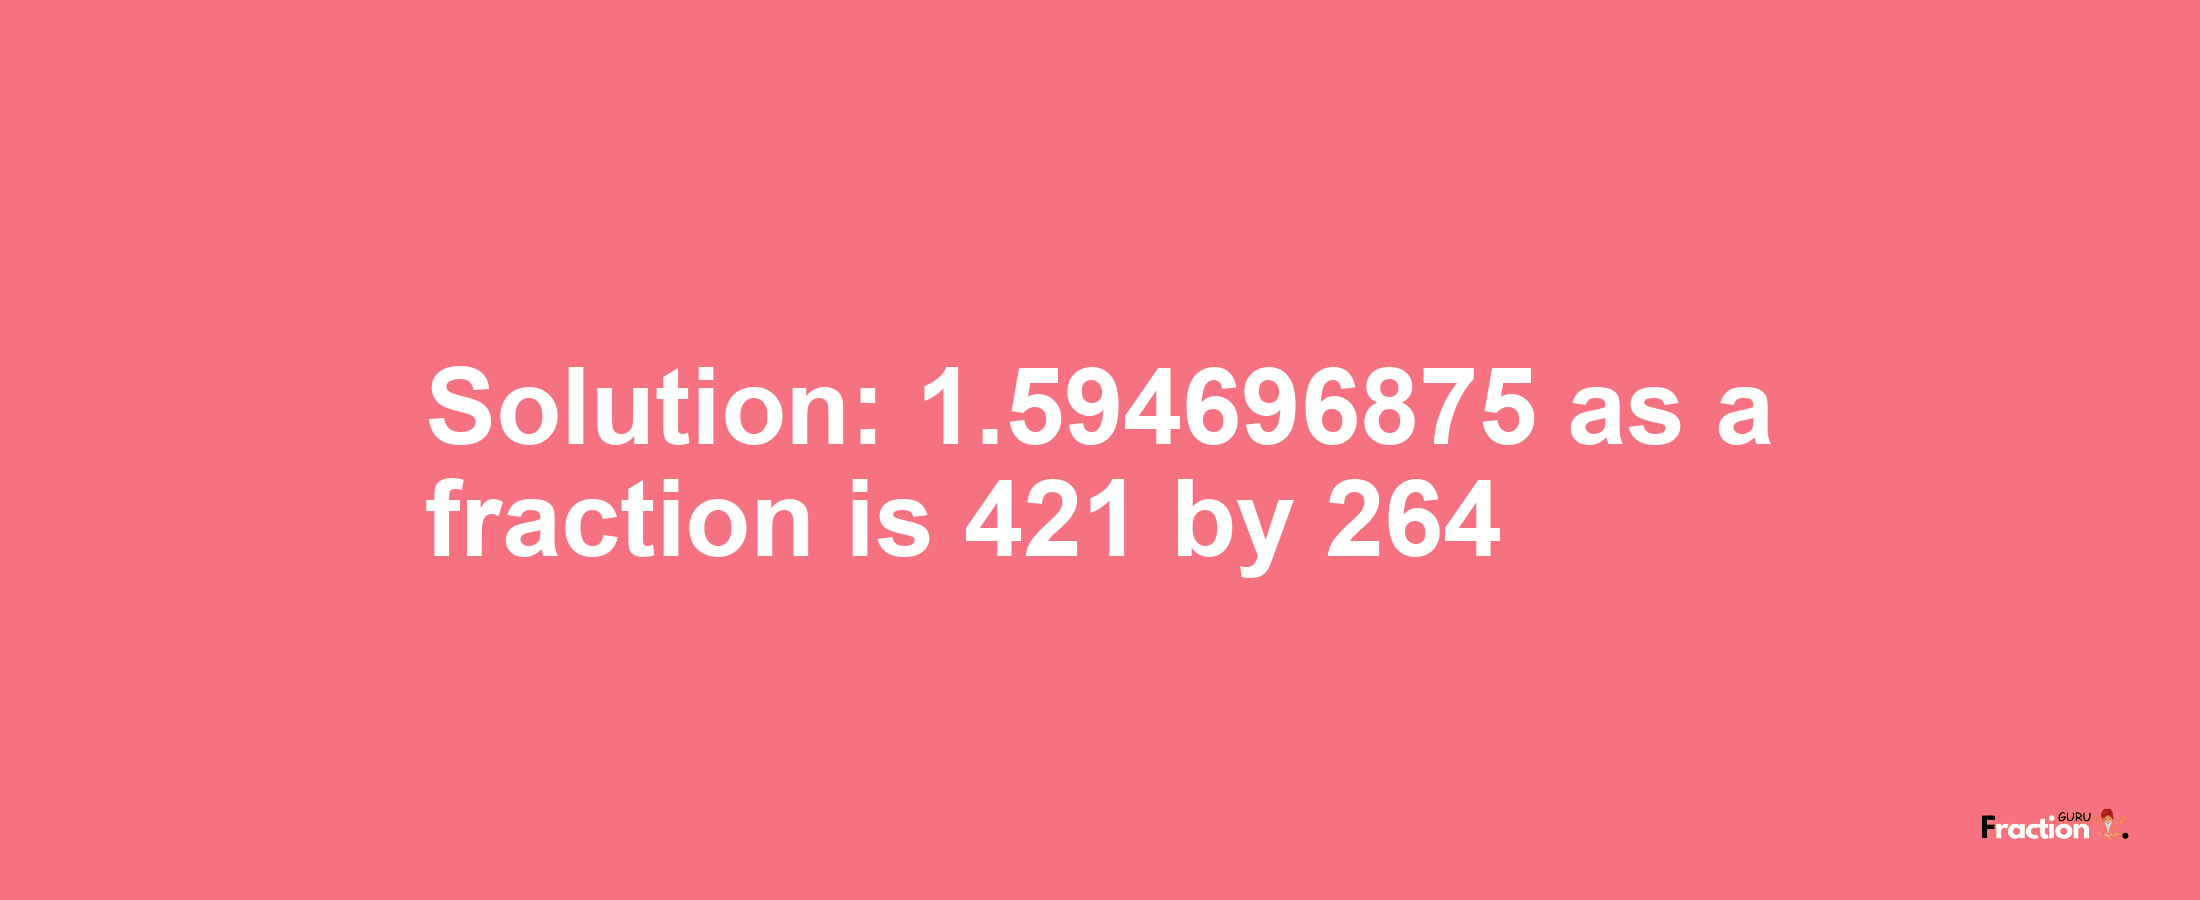 Solution:1.594696875 as a fraction is 421/264